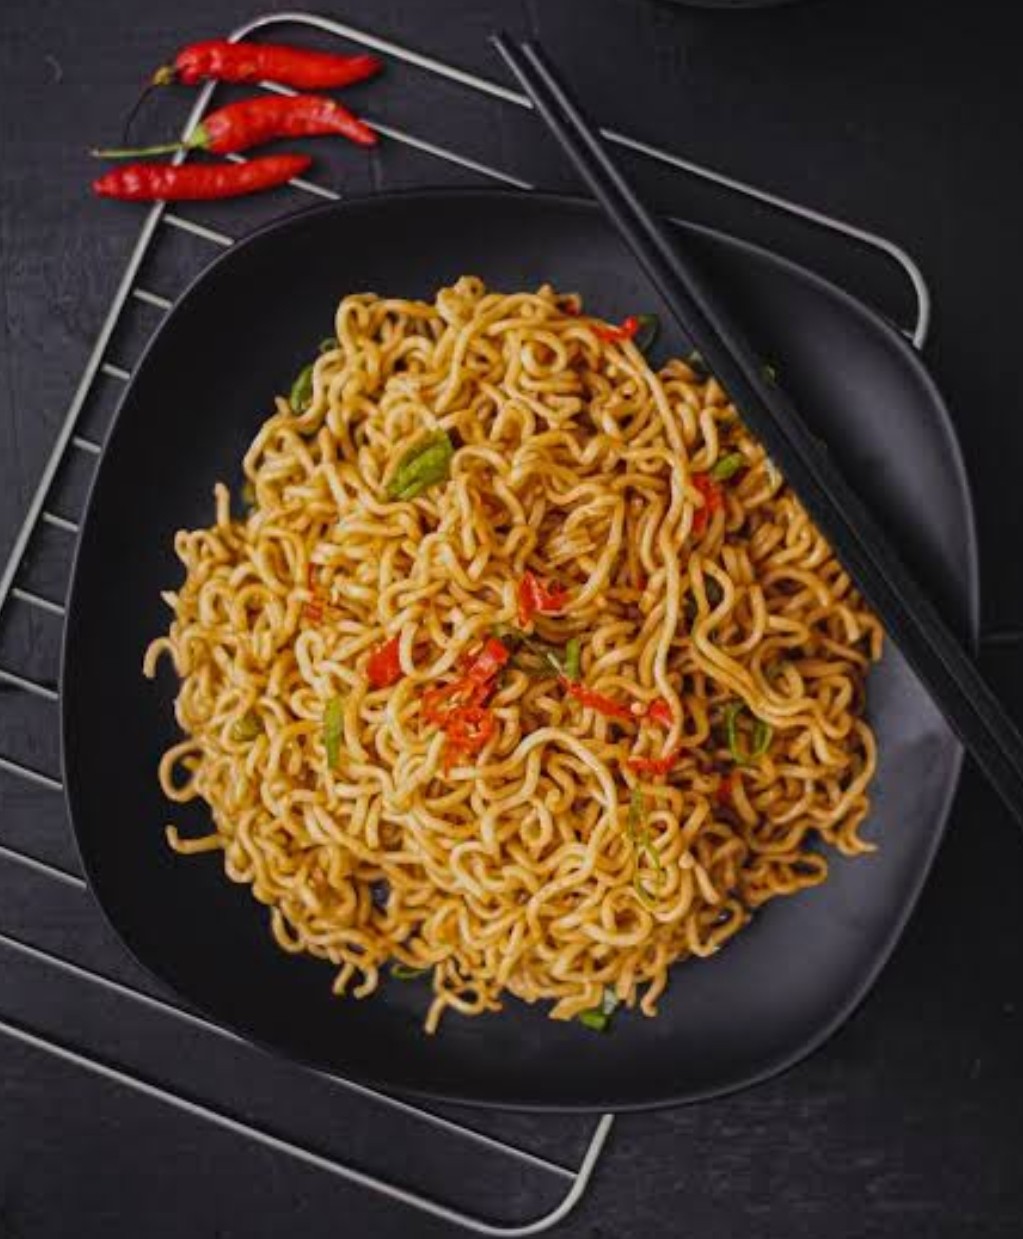 Noodles- nutritious instant meal with low carbs and great taste!